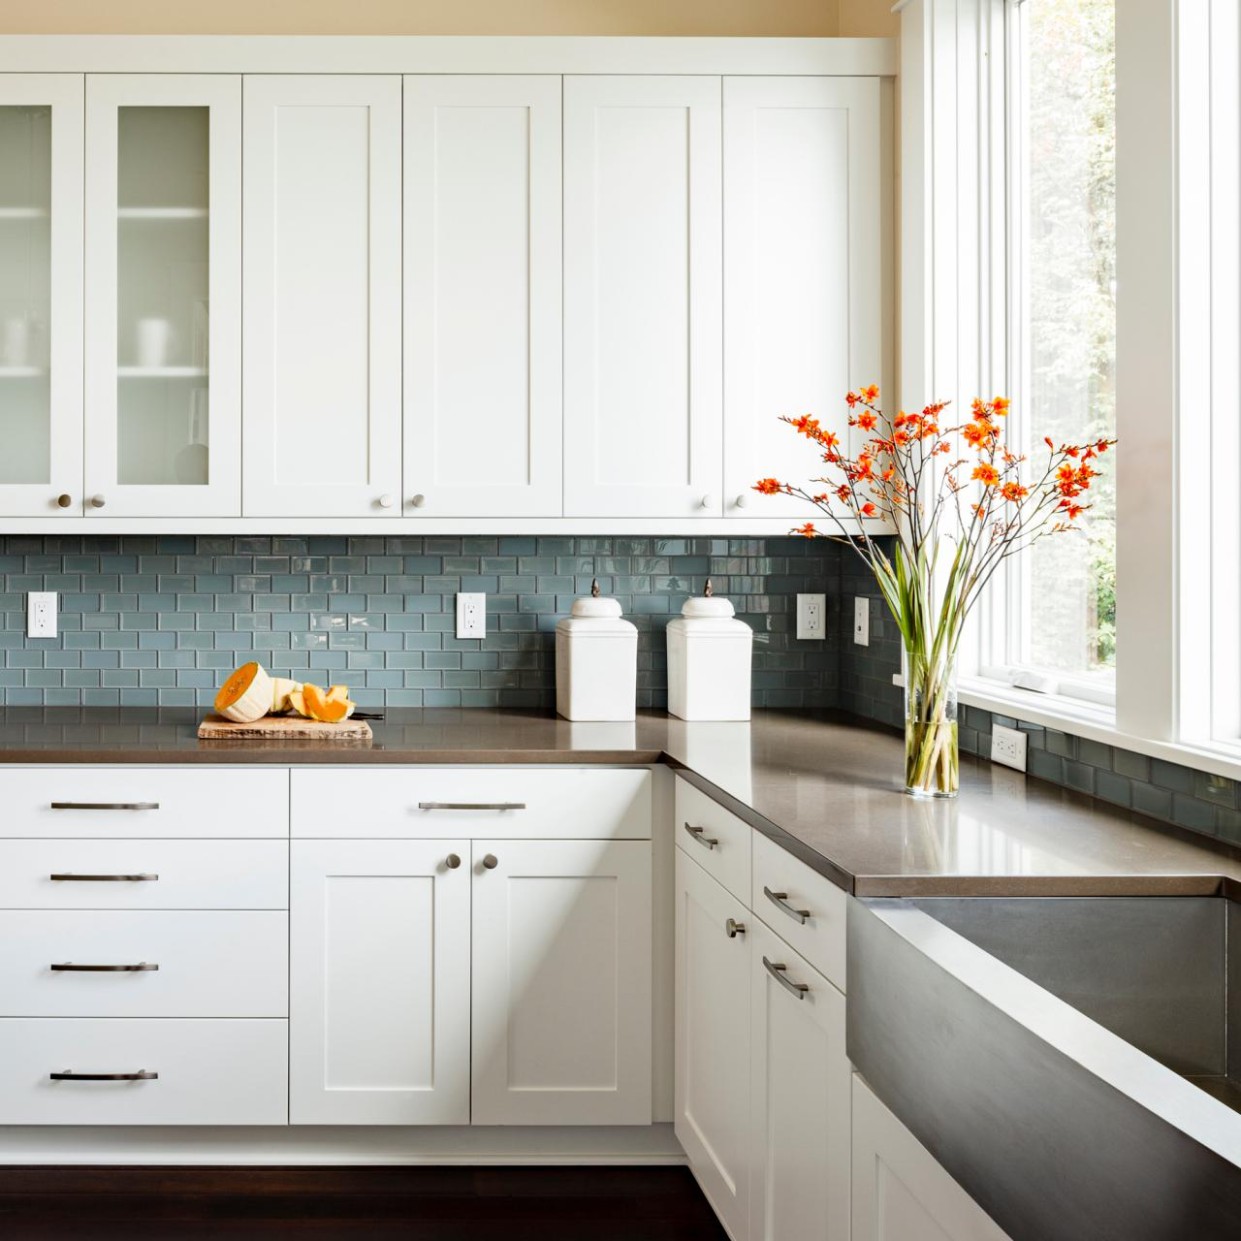 Kitchen Cabinet Materials: Pictures, Options, Tips & Ideas  HGTV - which material is good for modular kitchen?